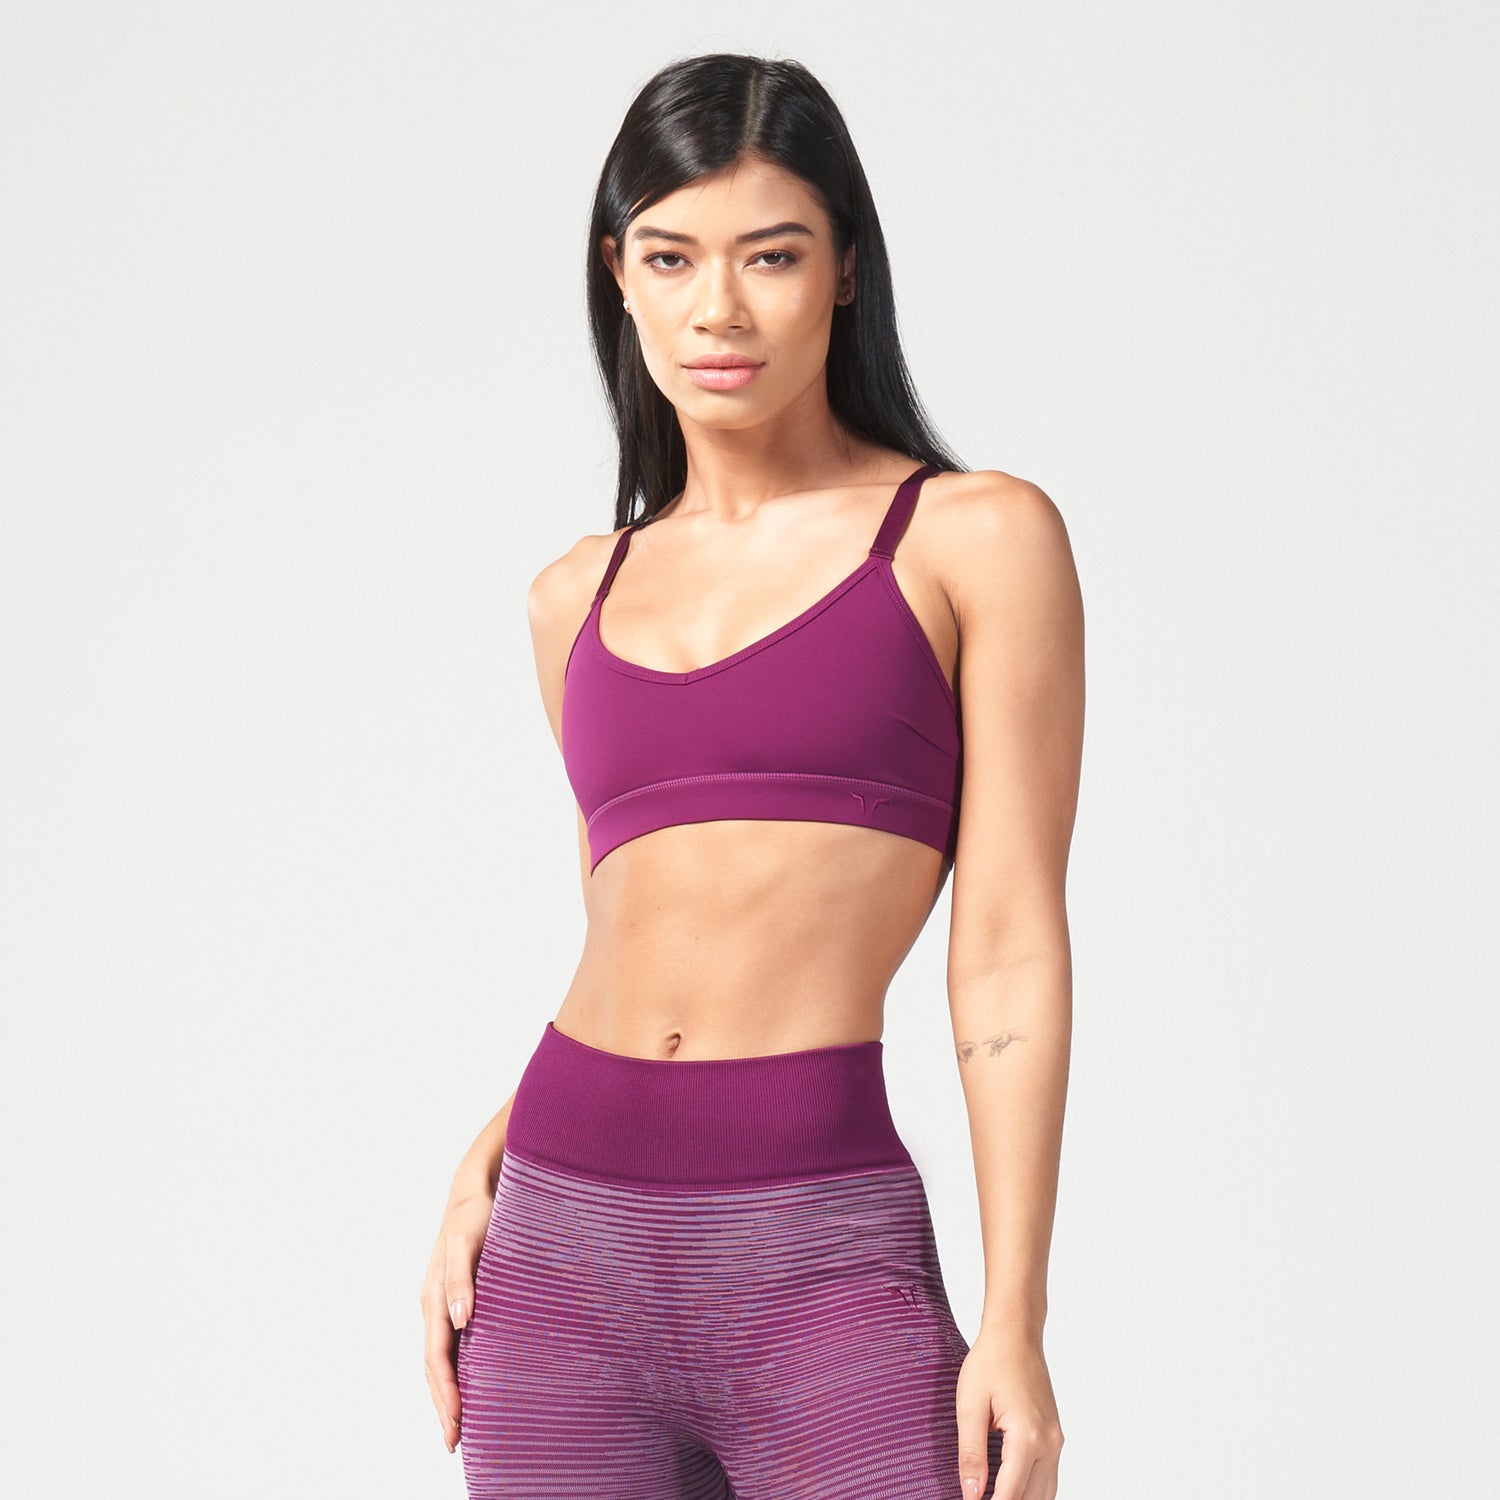 4 Sports Bras That Look And Feel Good While You Work Out